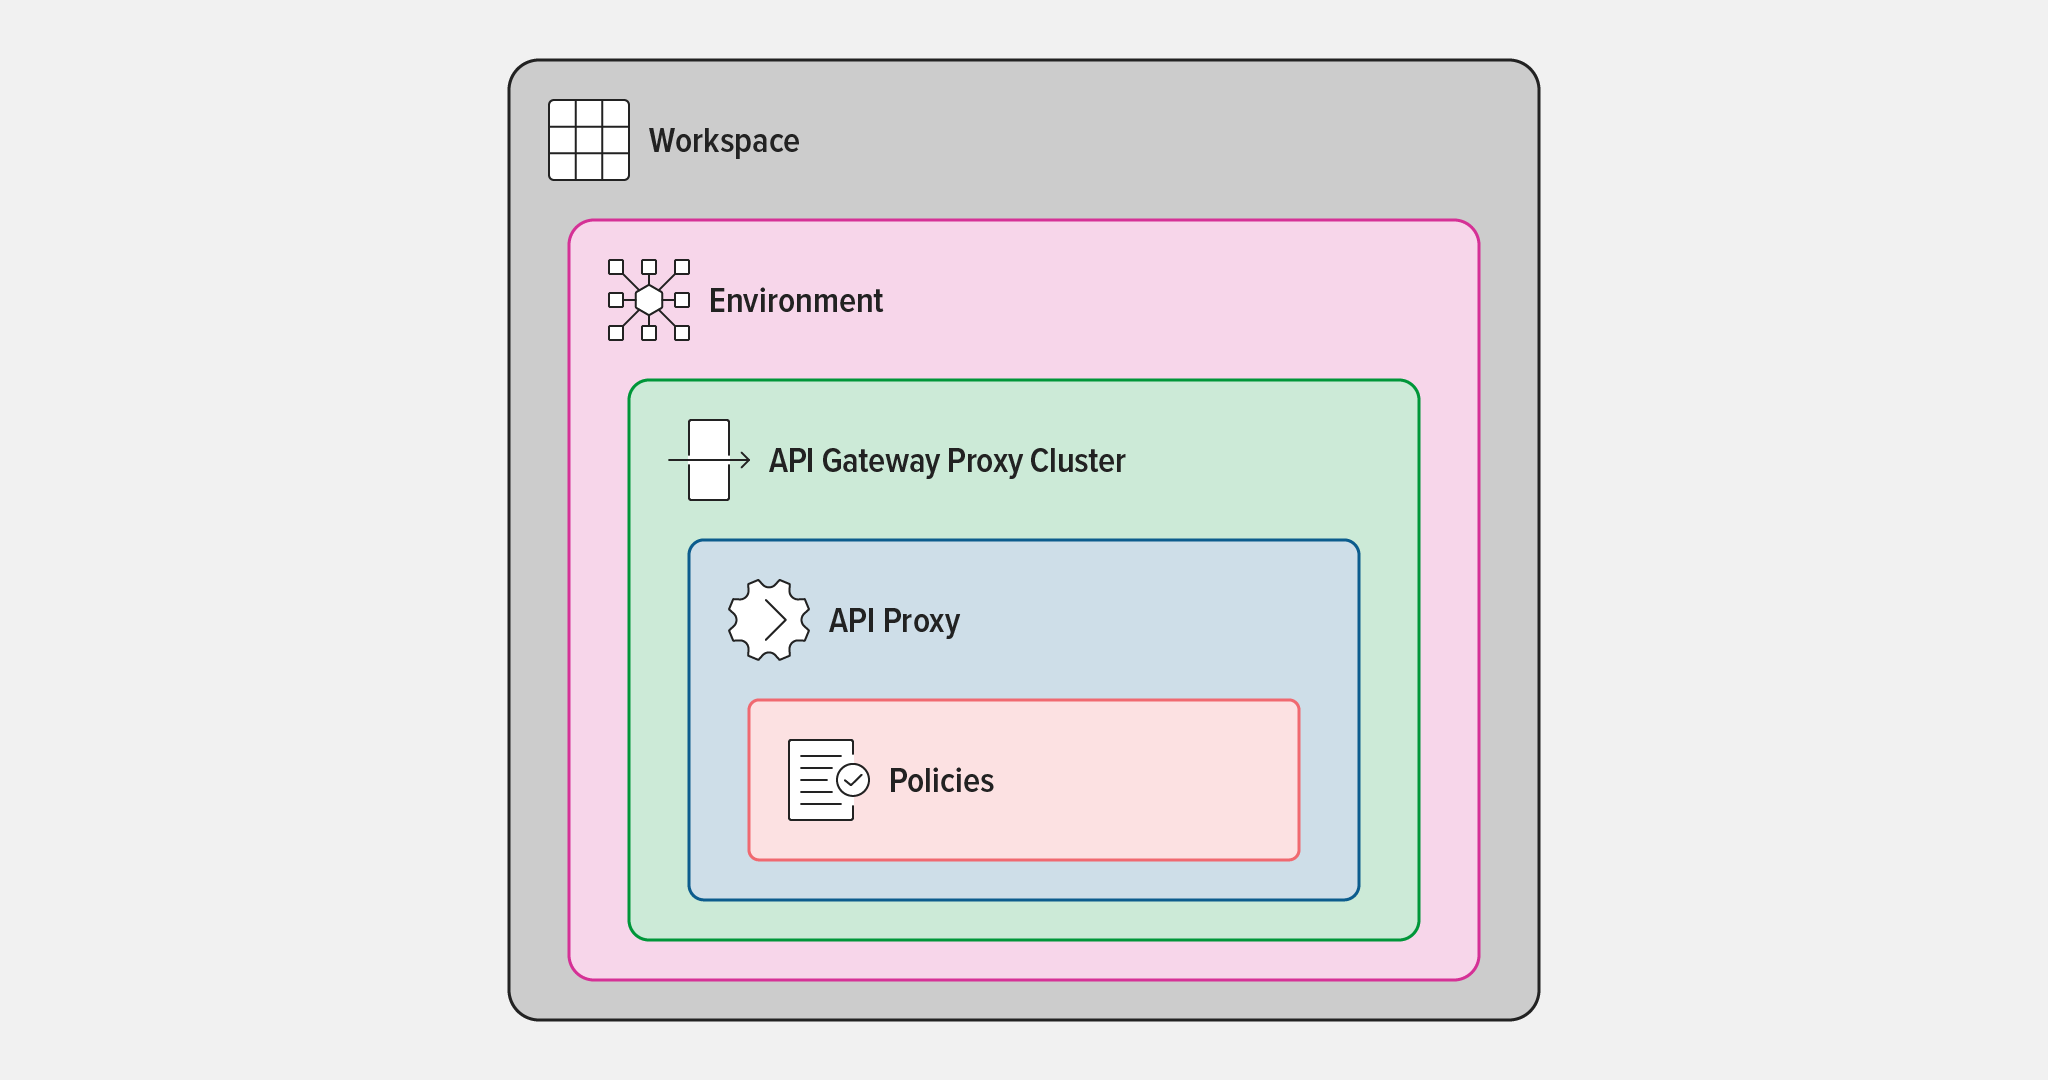 Diagram of nested API Connectivity Manager administrative objects. From outermost in: Workspace, Environment, API Gateway Proxy Cluster, API Proxy, Policies.